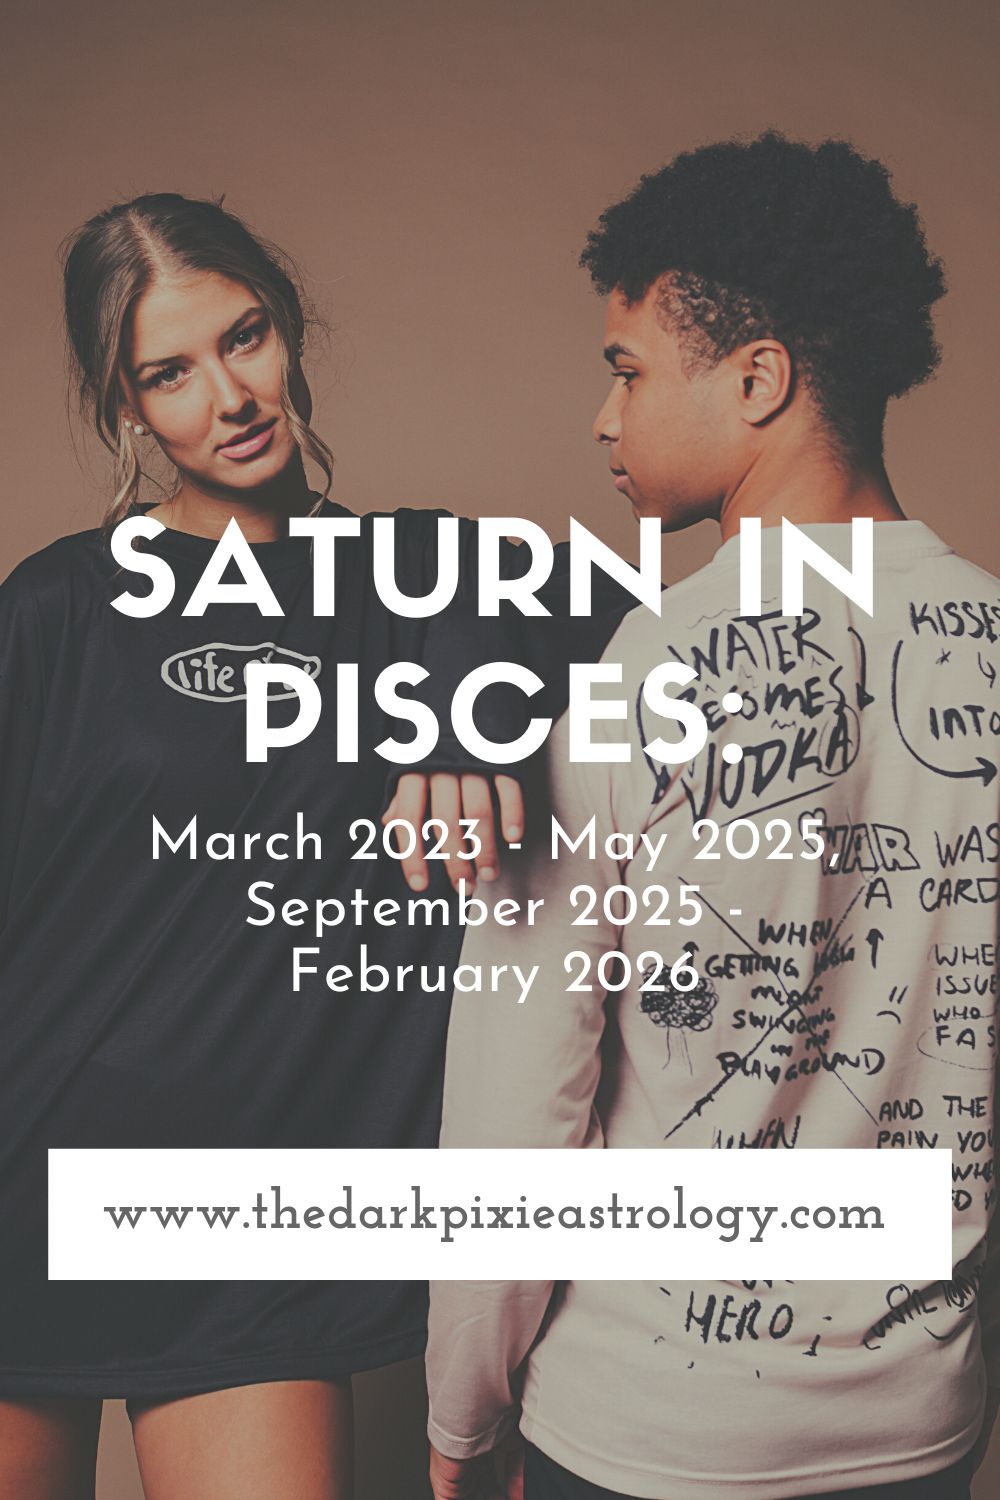 Saturn in Pisces March 2023 May 2025, September 2025 February 2026